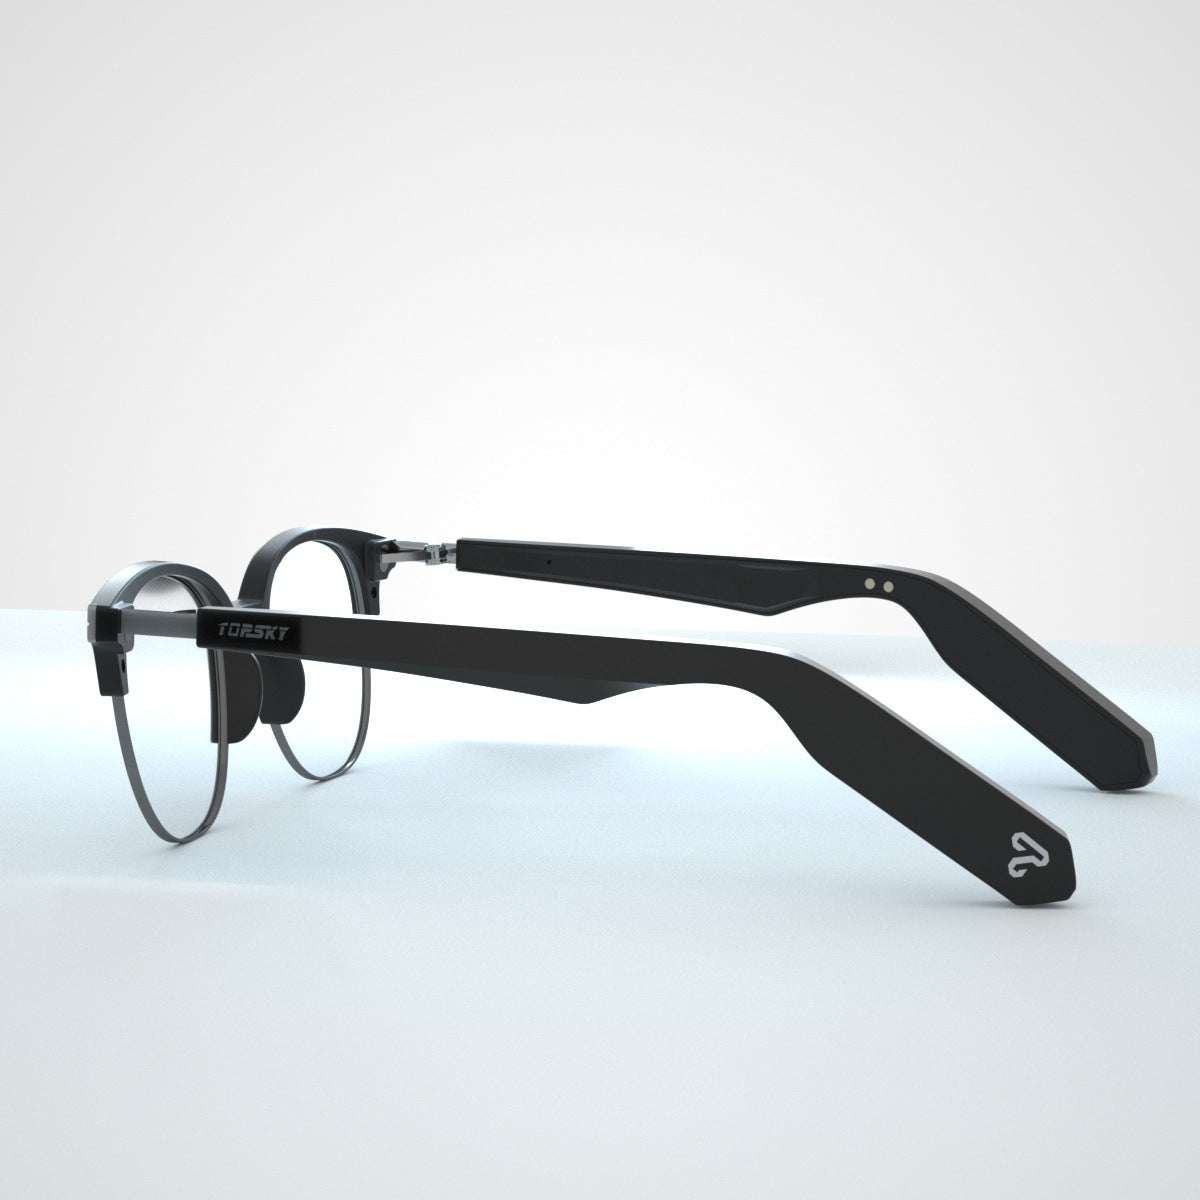 New Private Model TR Guided Wireless Smart Glasses